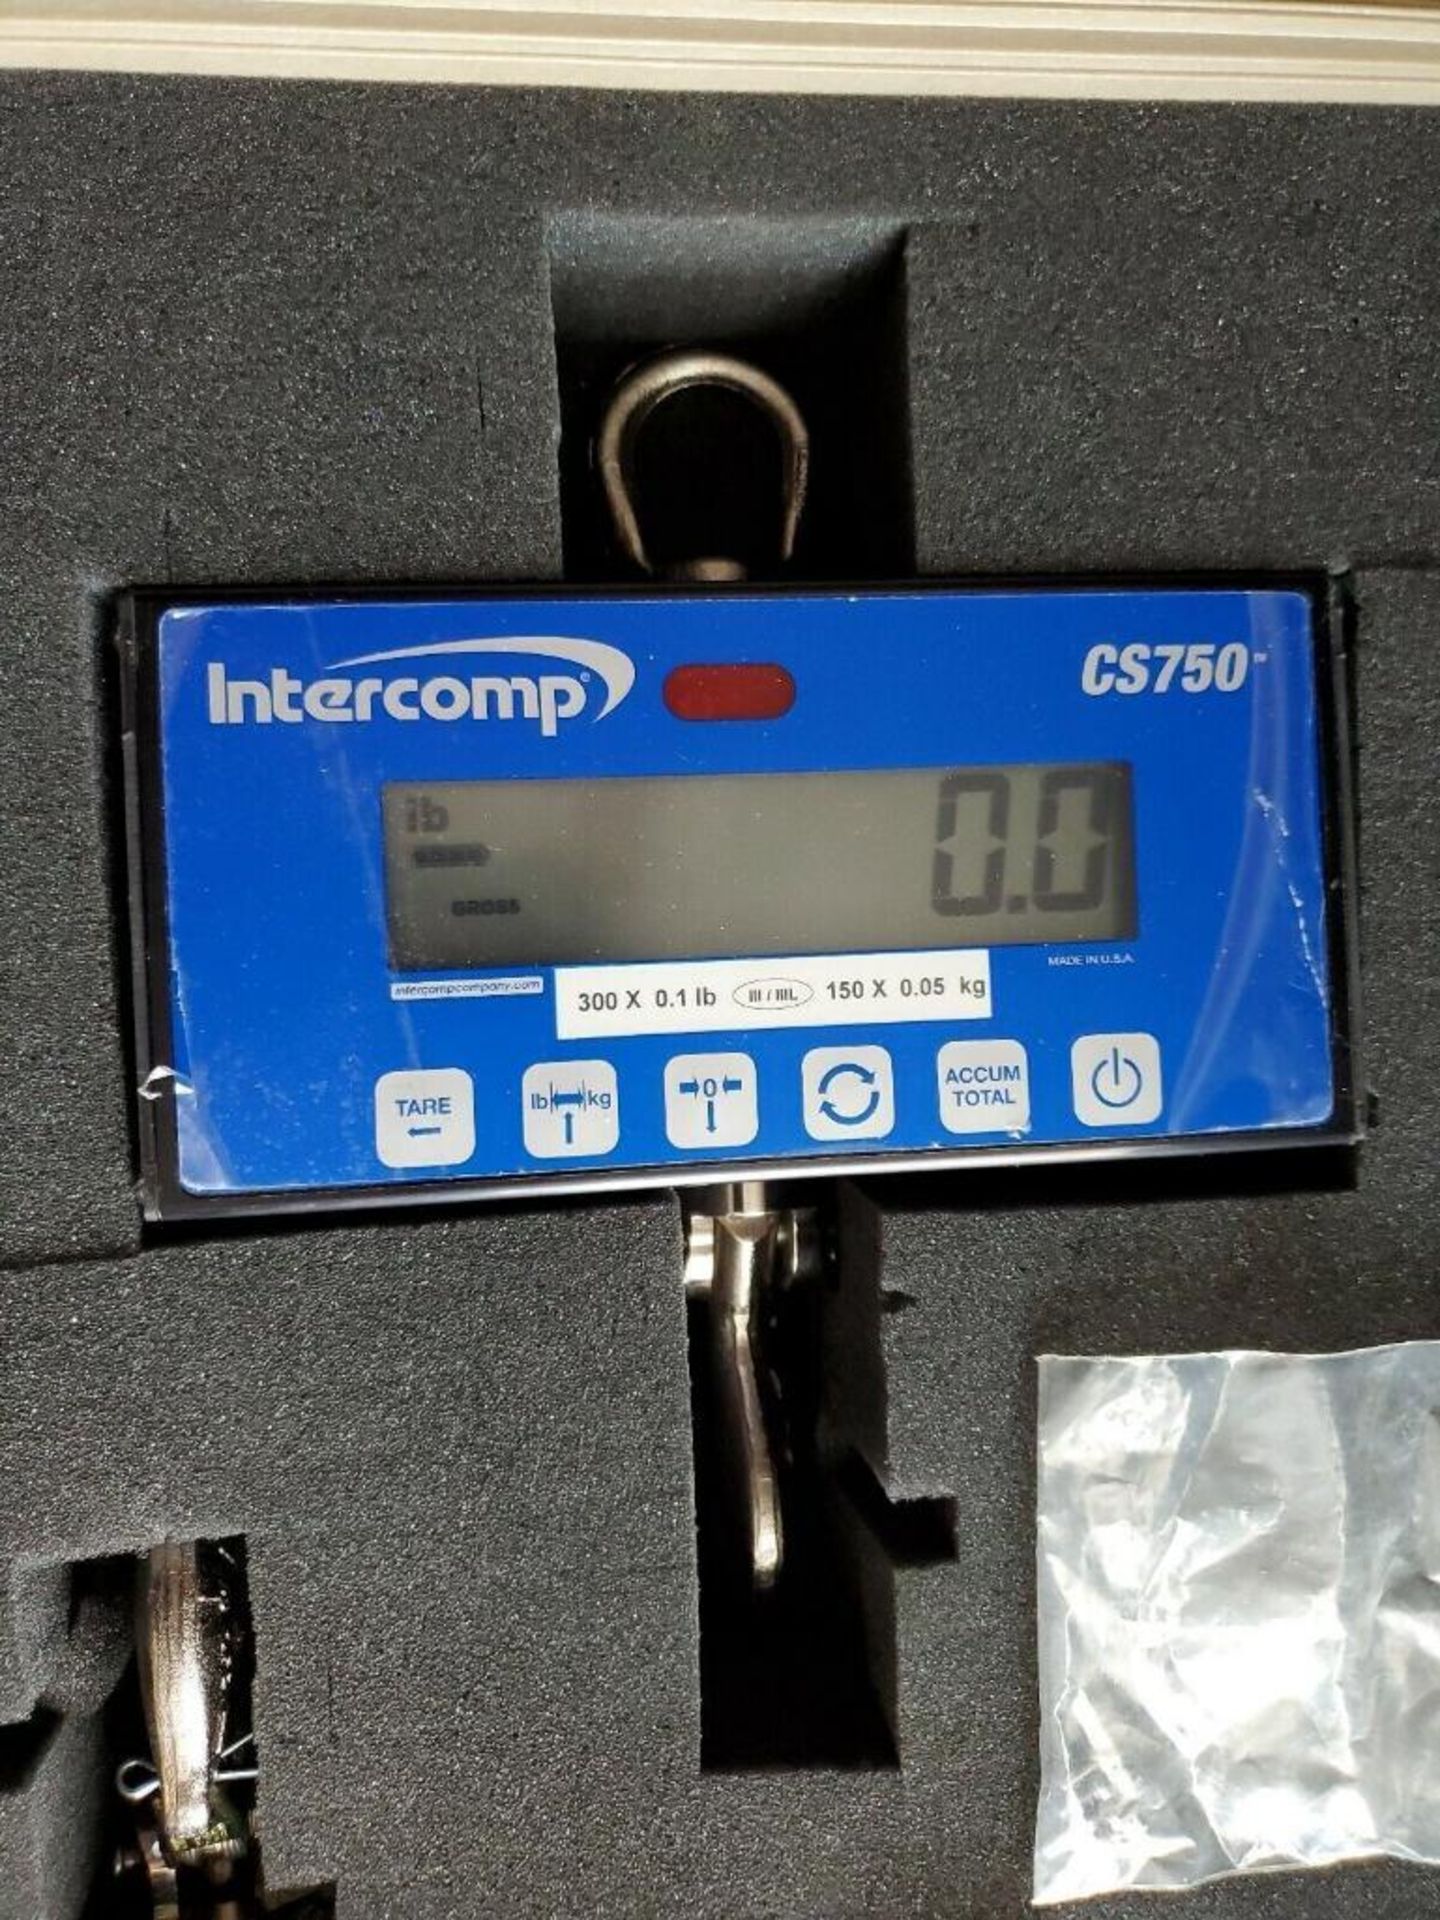 LOT OF 2 INTERCOMP CS750 SCALES W REMOTES IN PELICAN 1600 CASE - Image 4 of 7